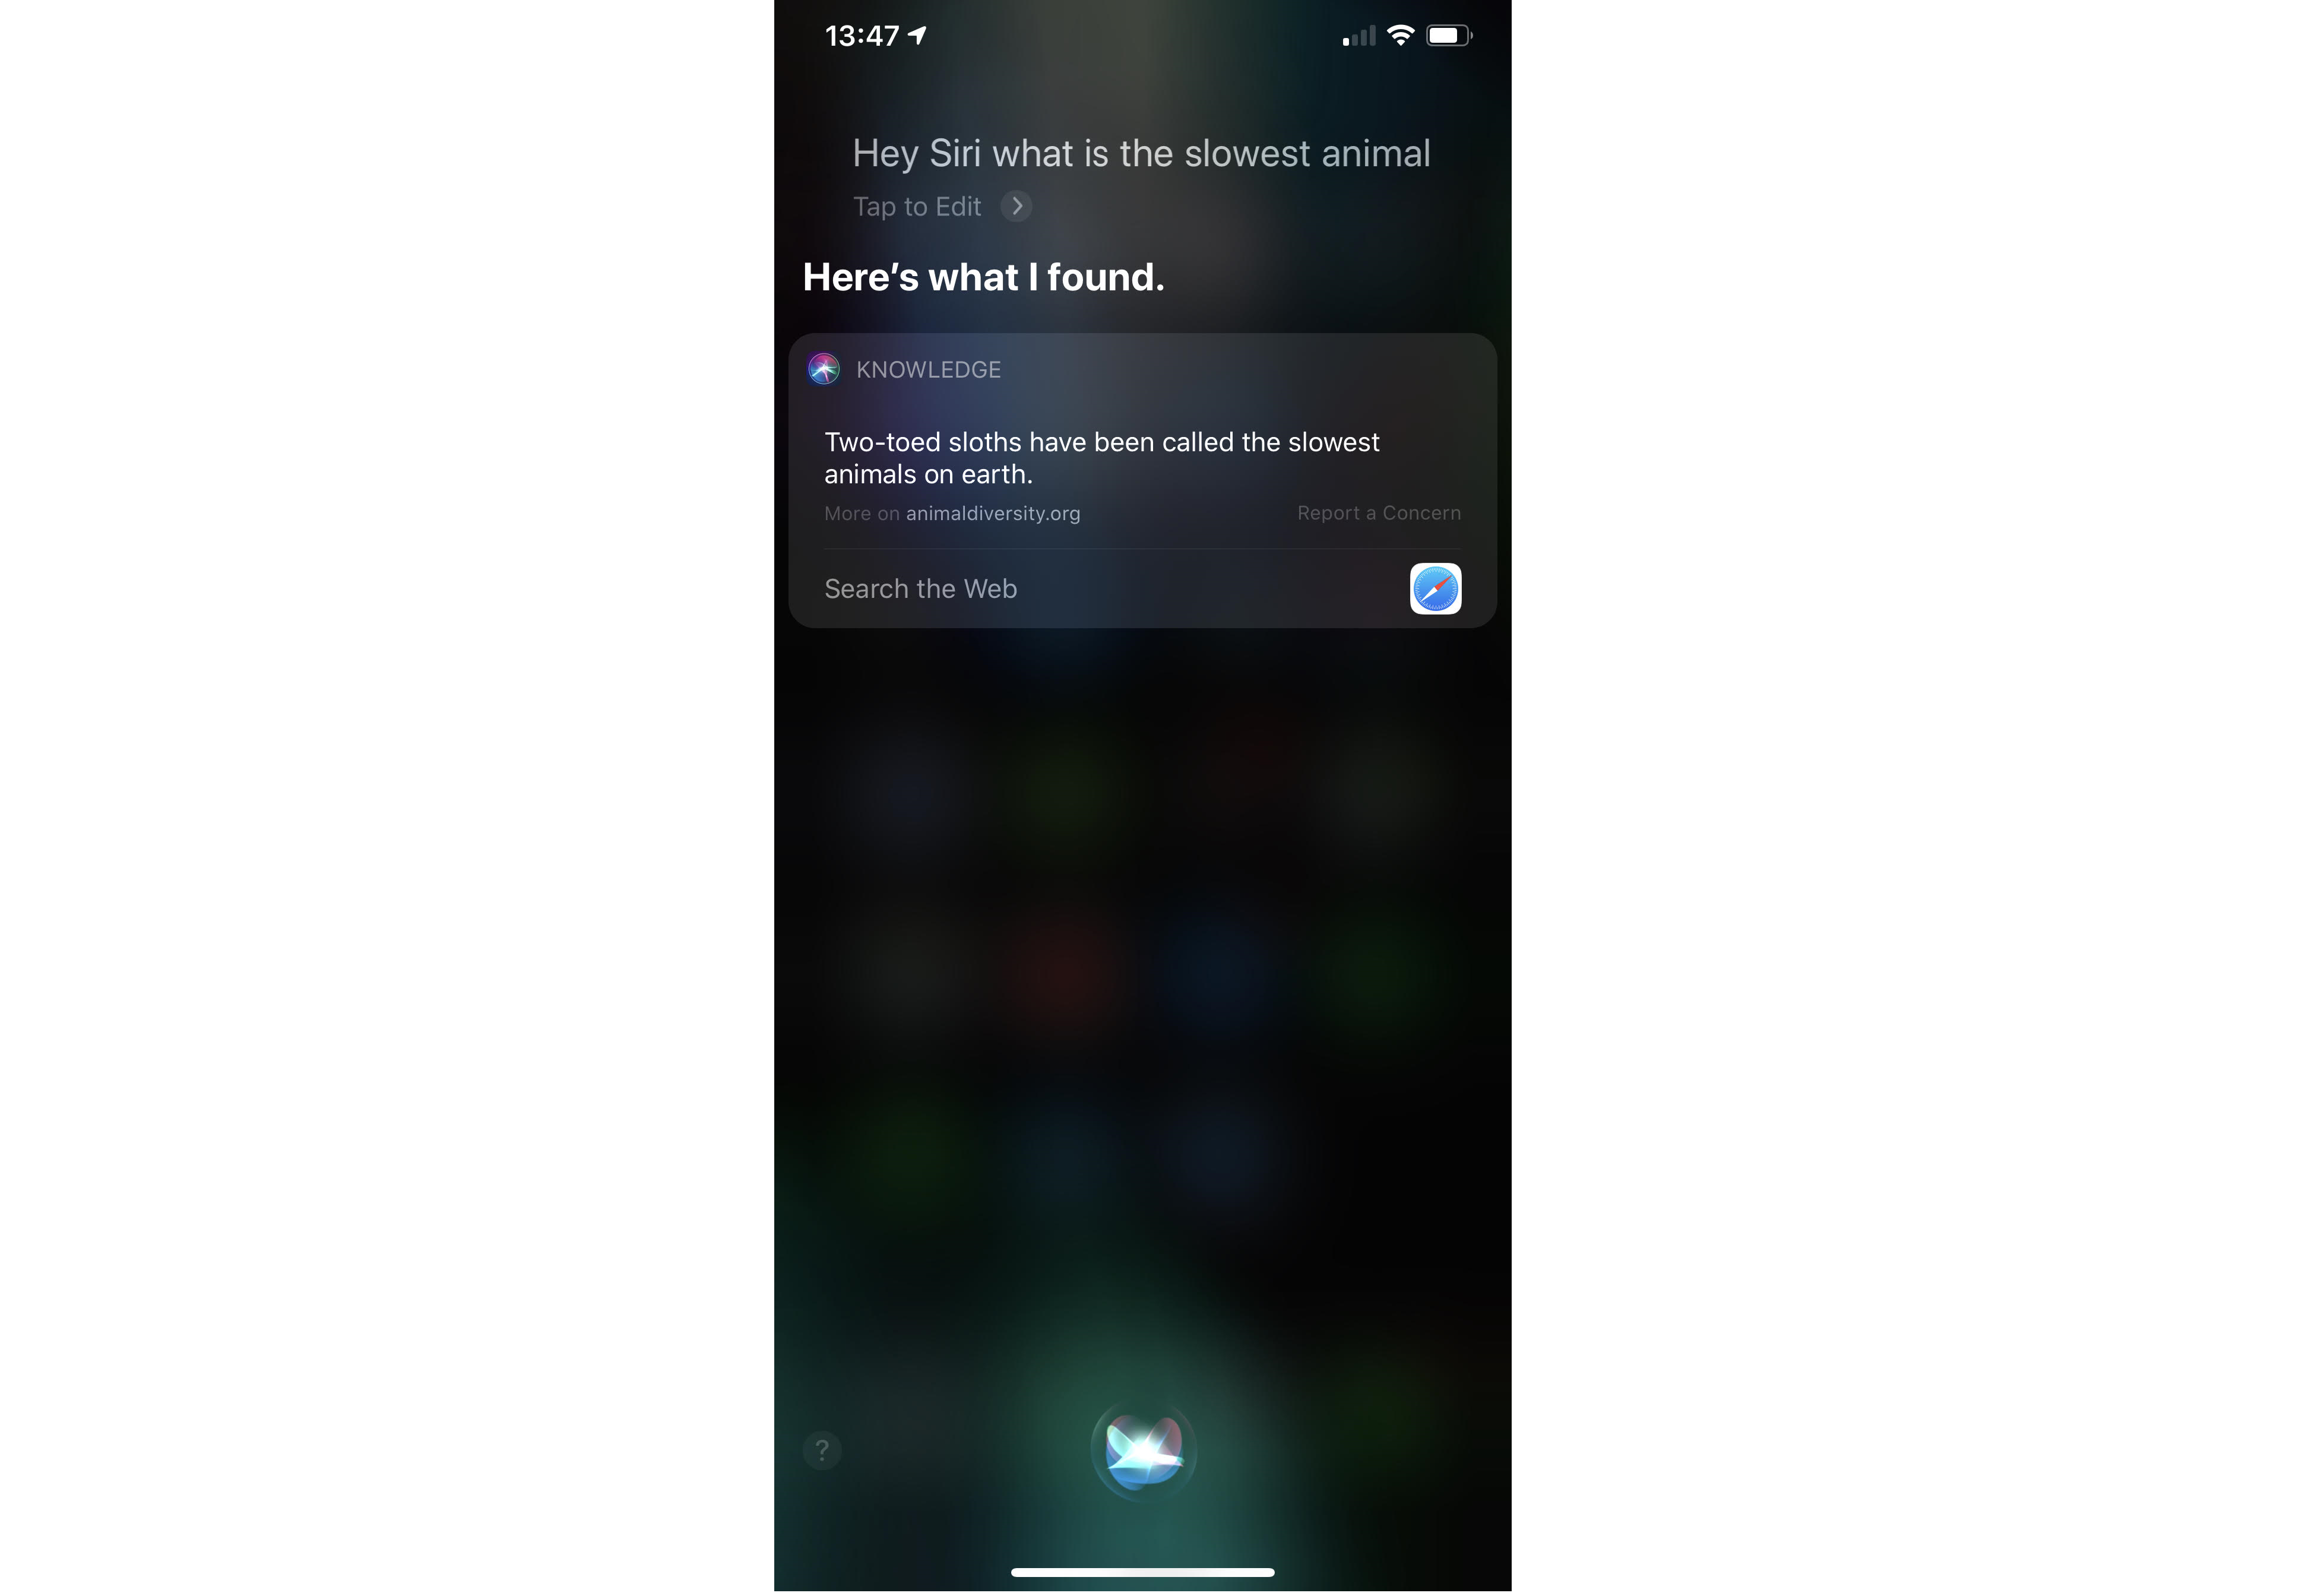 Siri search for slowest animal